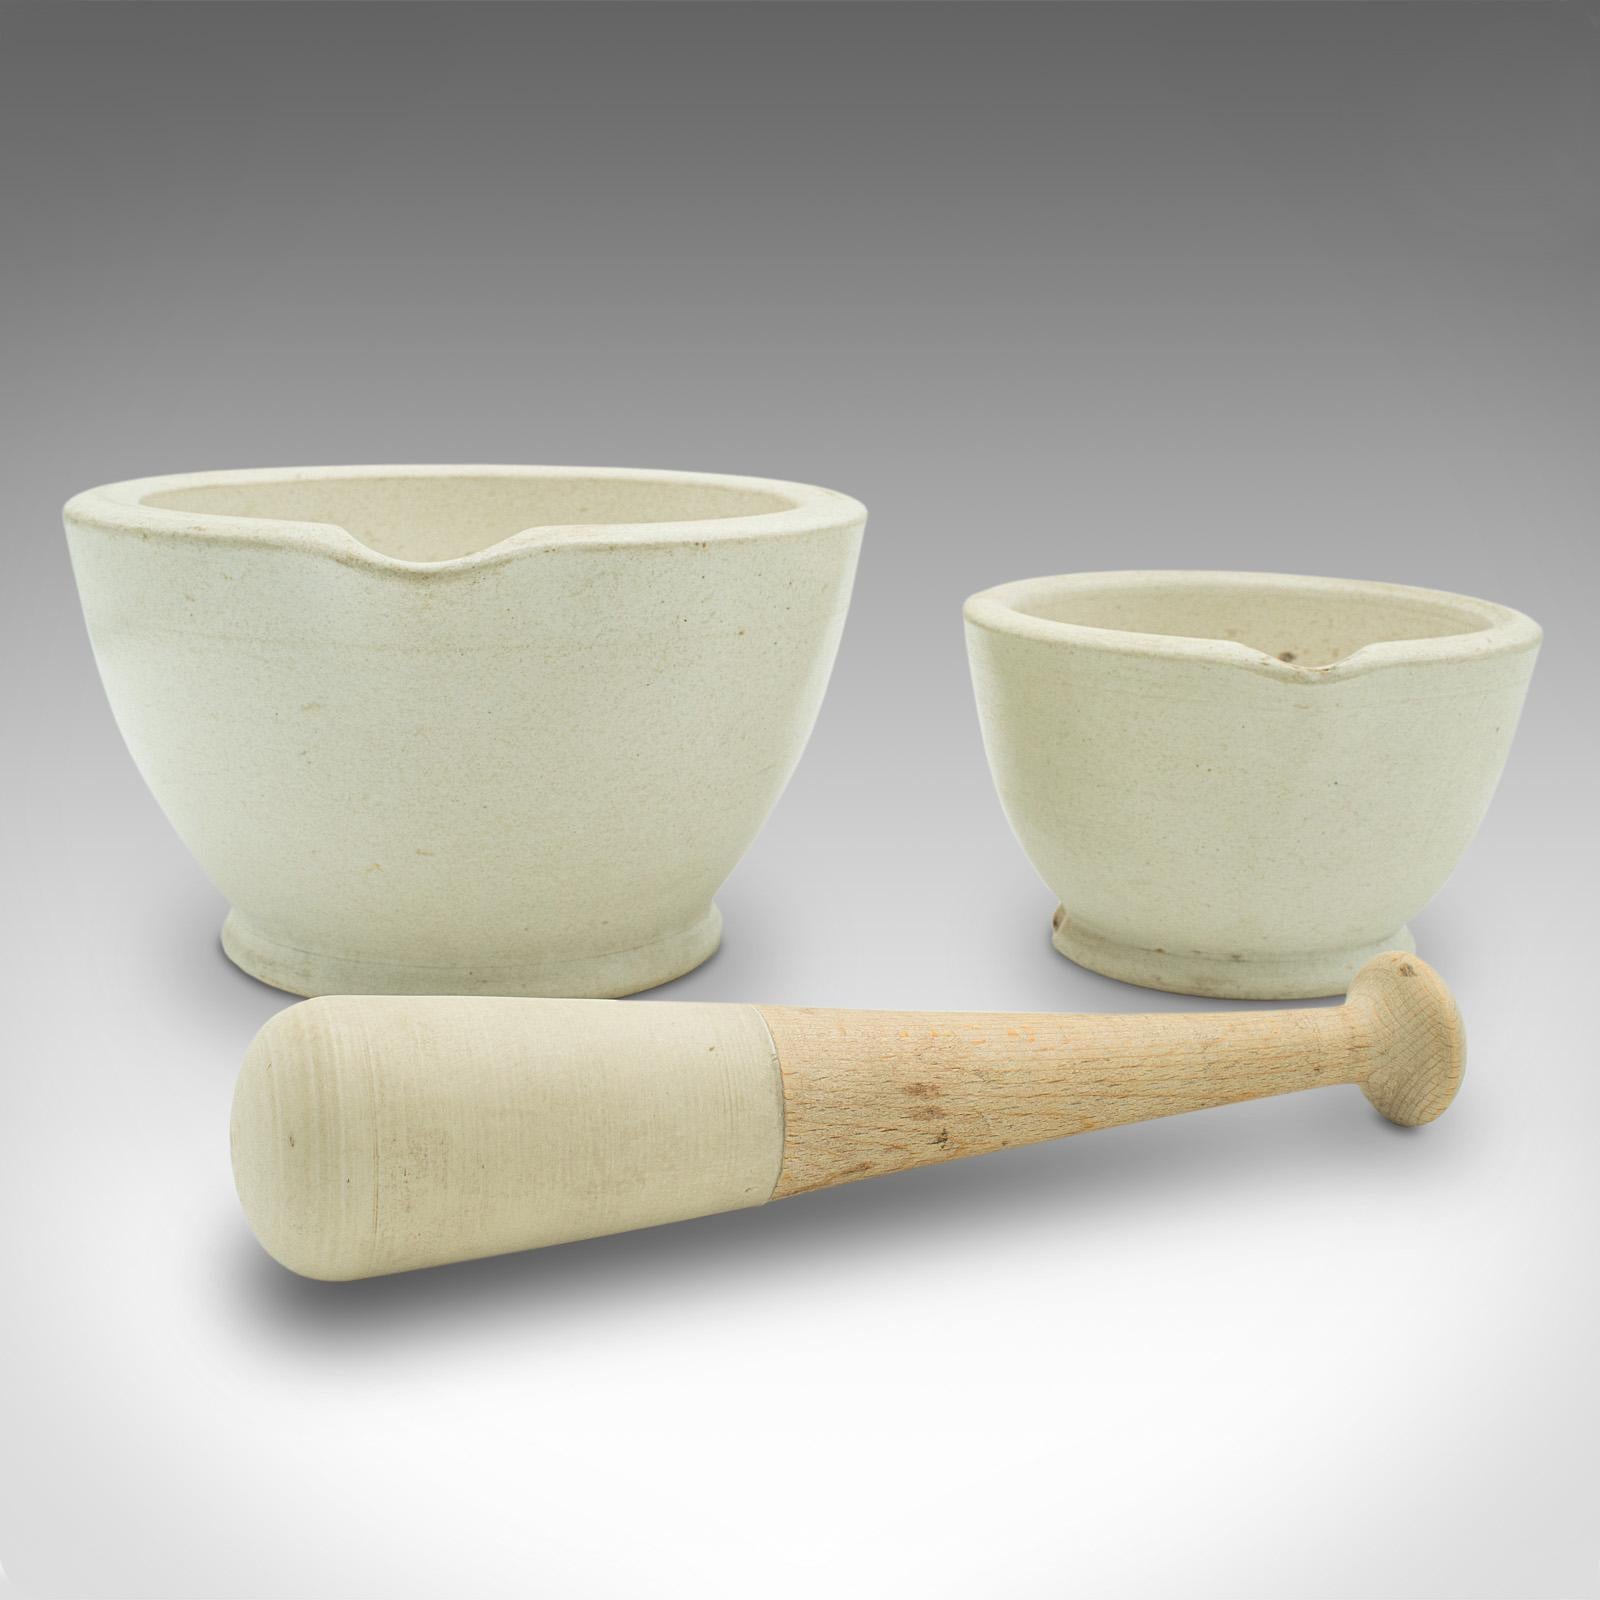 This is a small antique mortar and pestle duo. An English, ceramic and beech cooking or apothecary aid, dating to the late Victorian period, circa 1890.

Pleasingly substantial with classic kitchen appeal
Displaying a desirable aged patina with